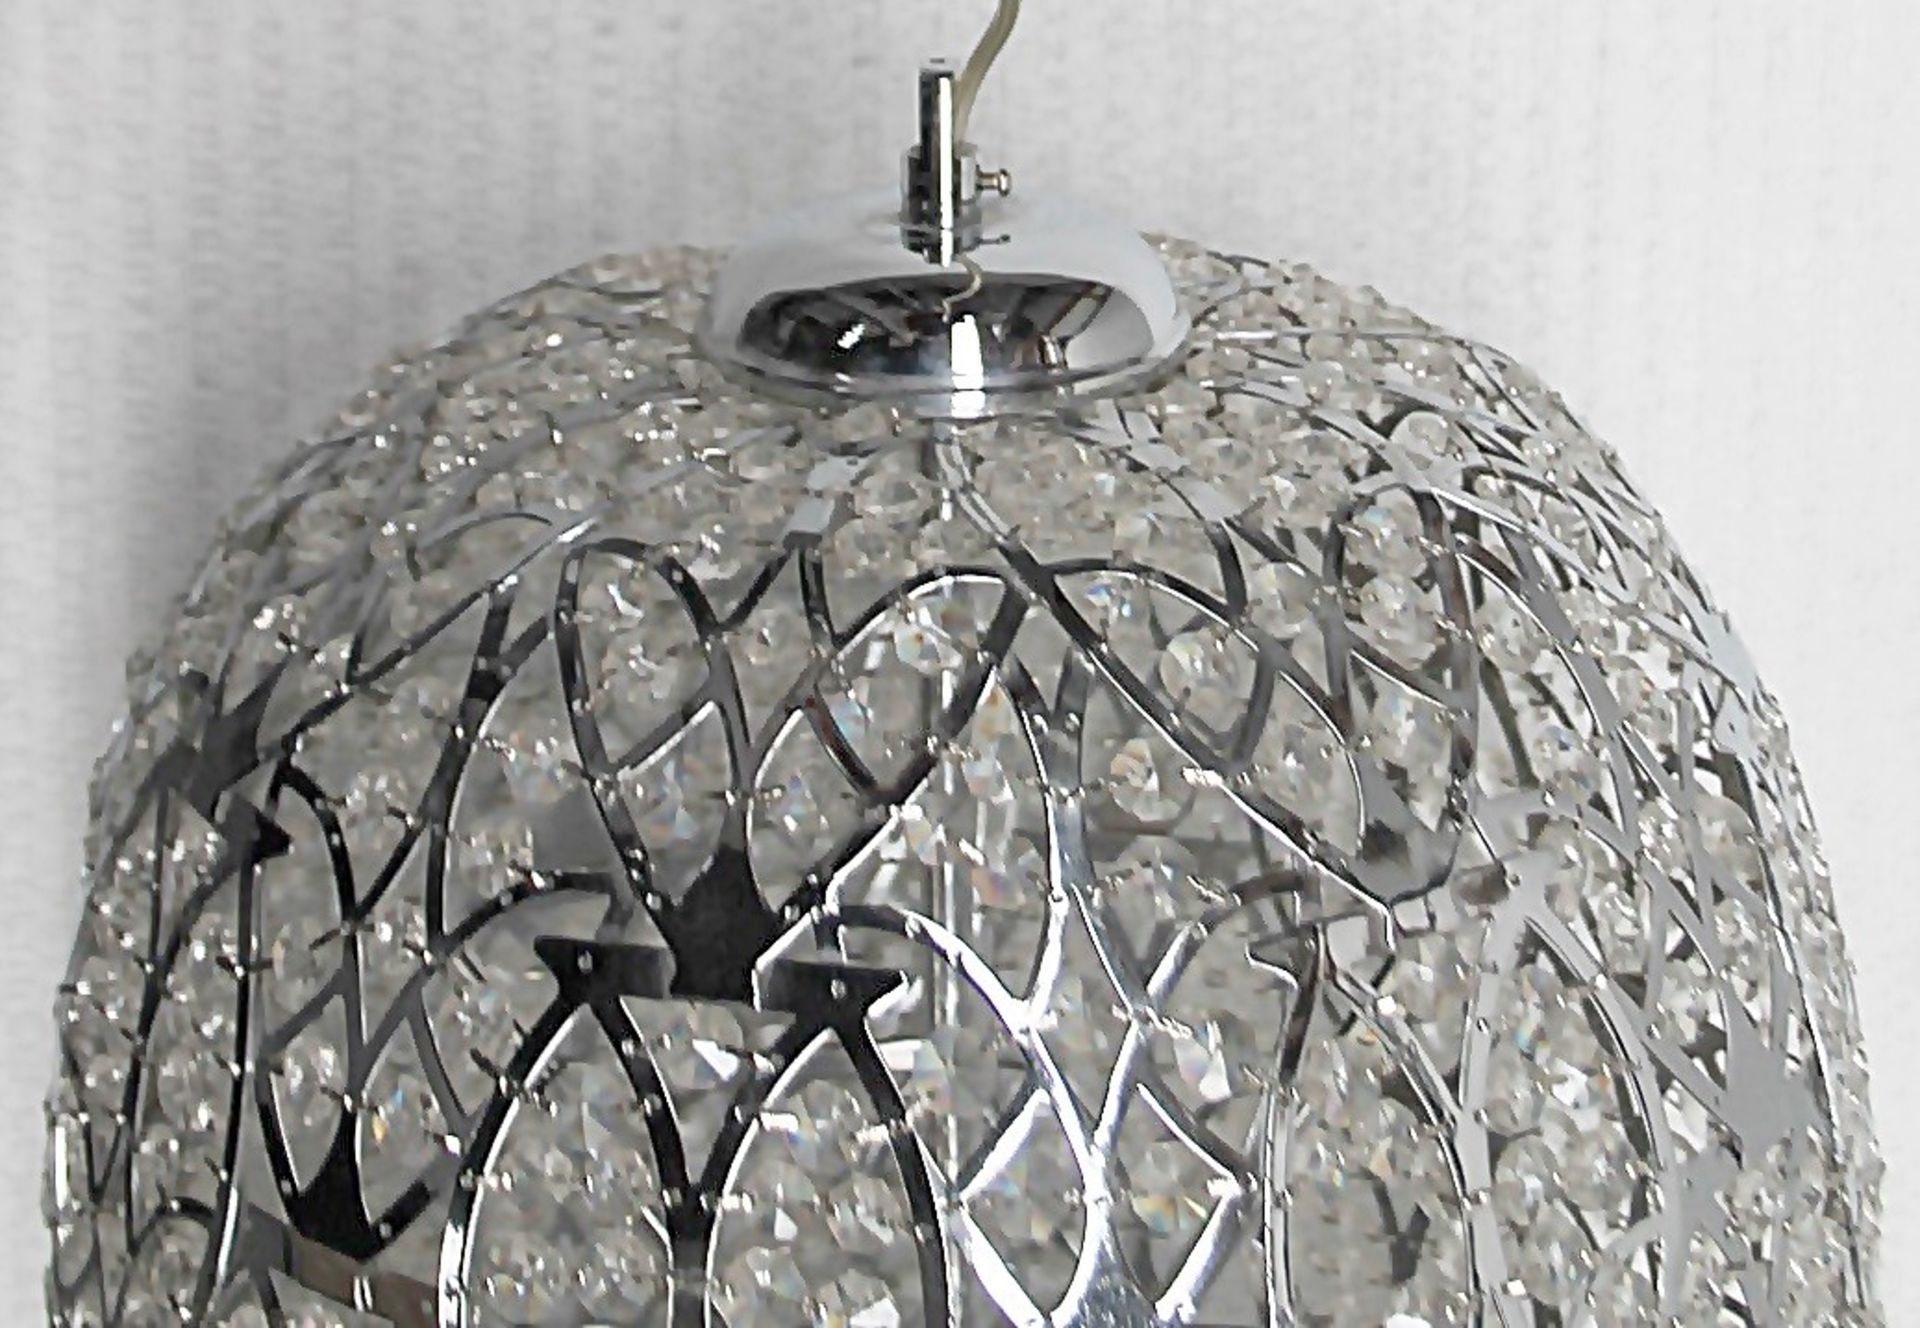 1 x High-end Italian LED Light Fitting Encrusted In Premium ASFOUR Crystal Elements - Approximate - Image 5 of 8